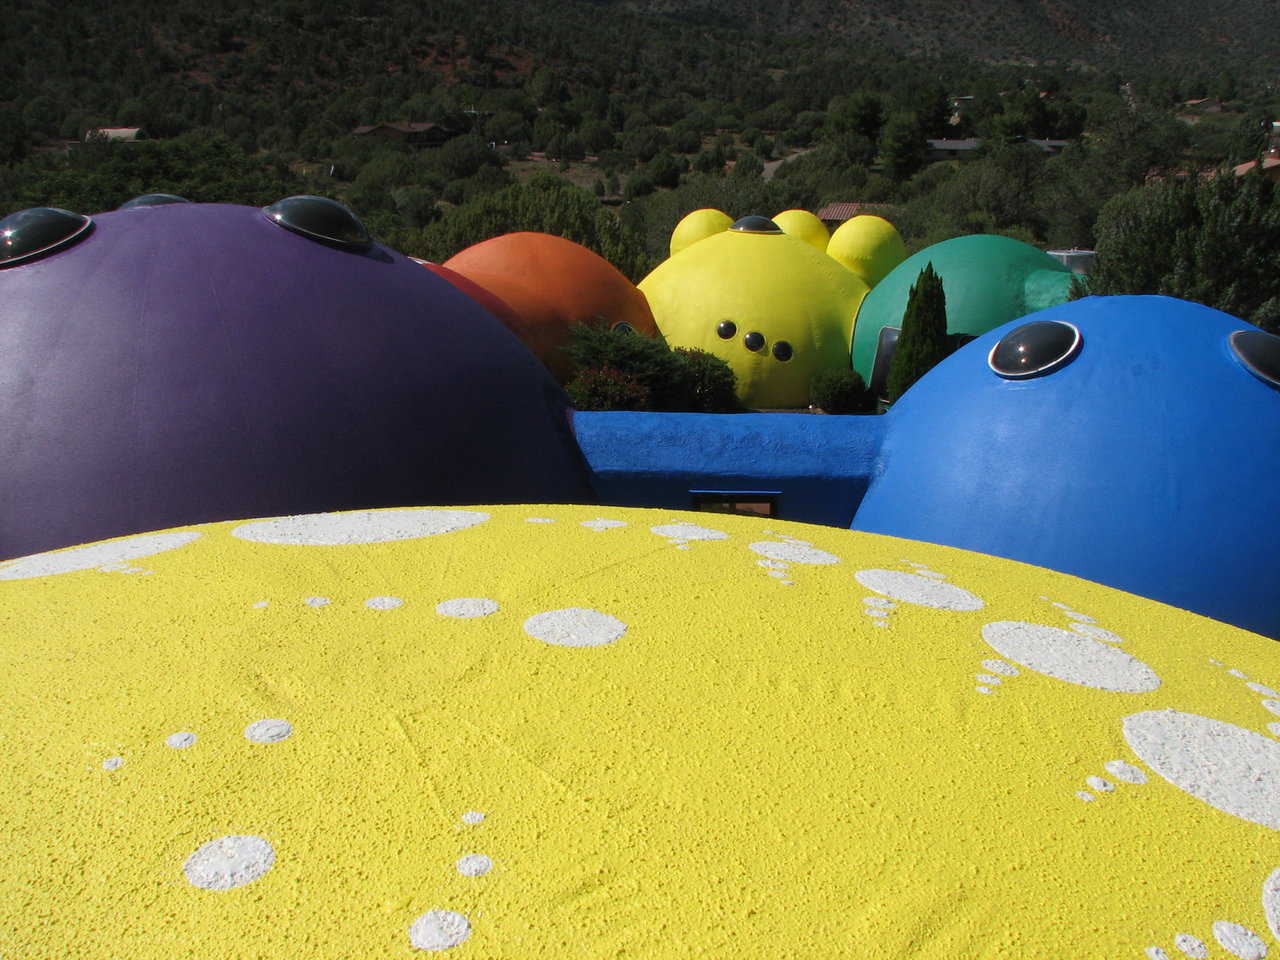 One tourist described Xanadu as, “A giant collection of brightly colored, giant Easter eggs.”